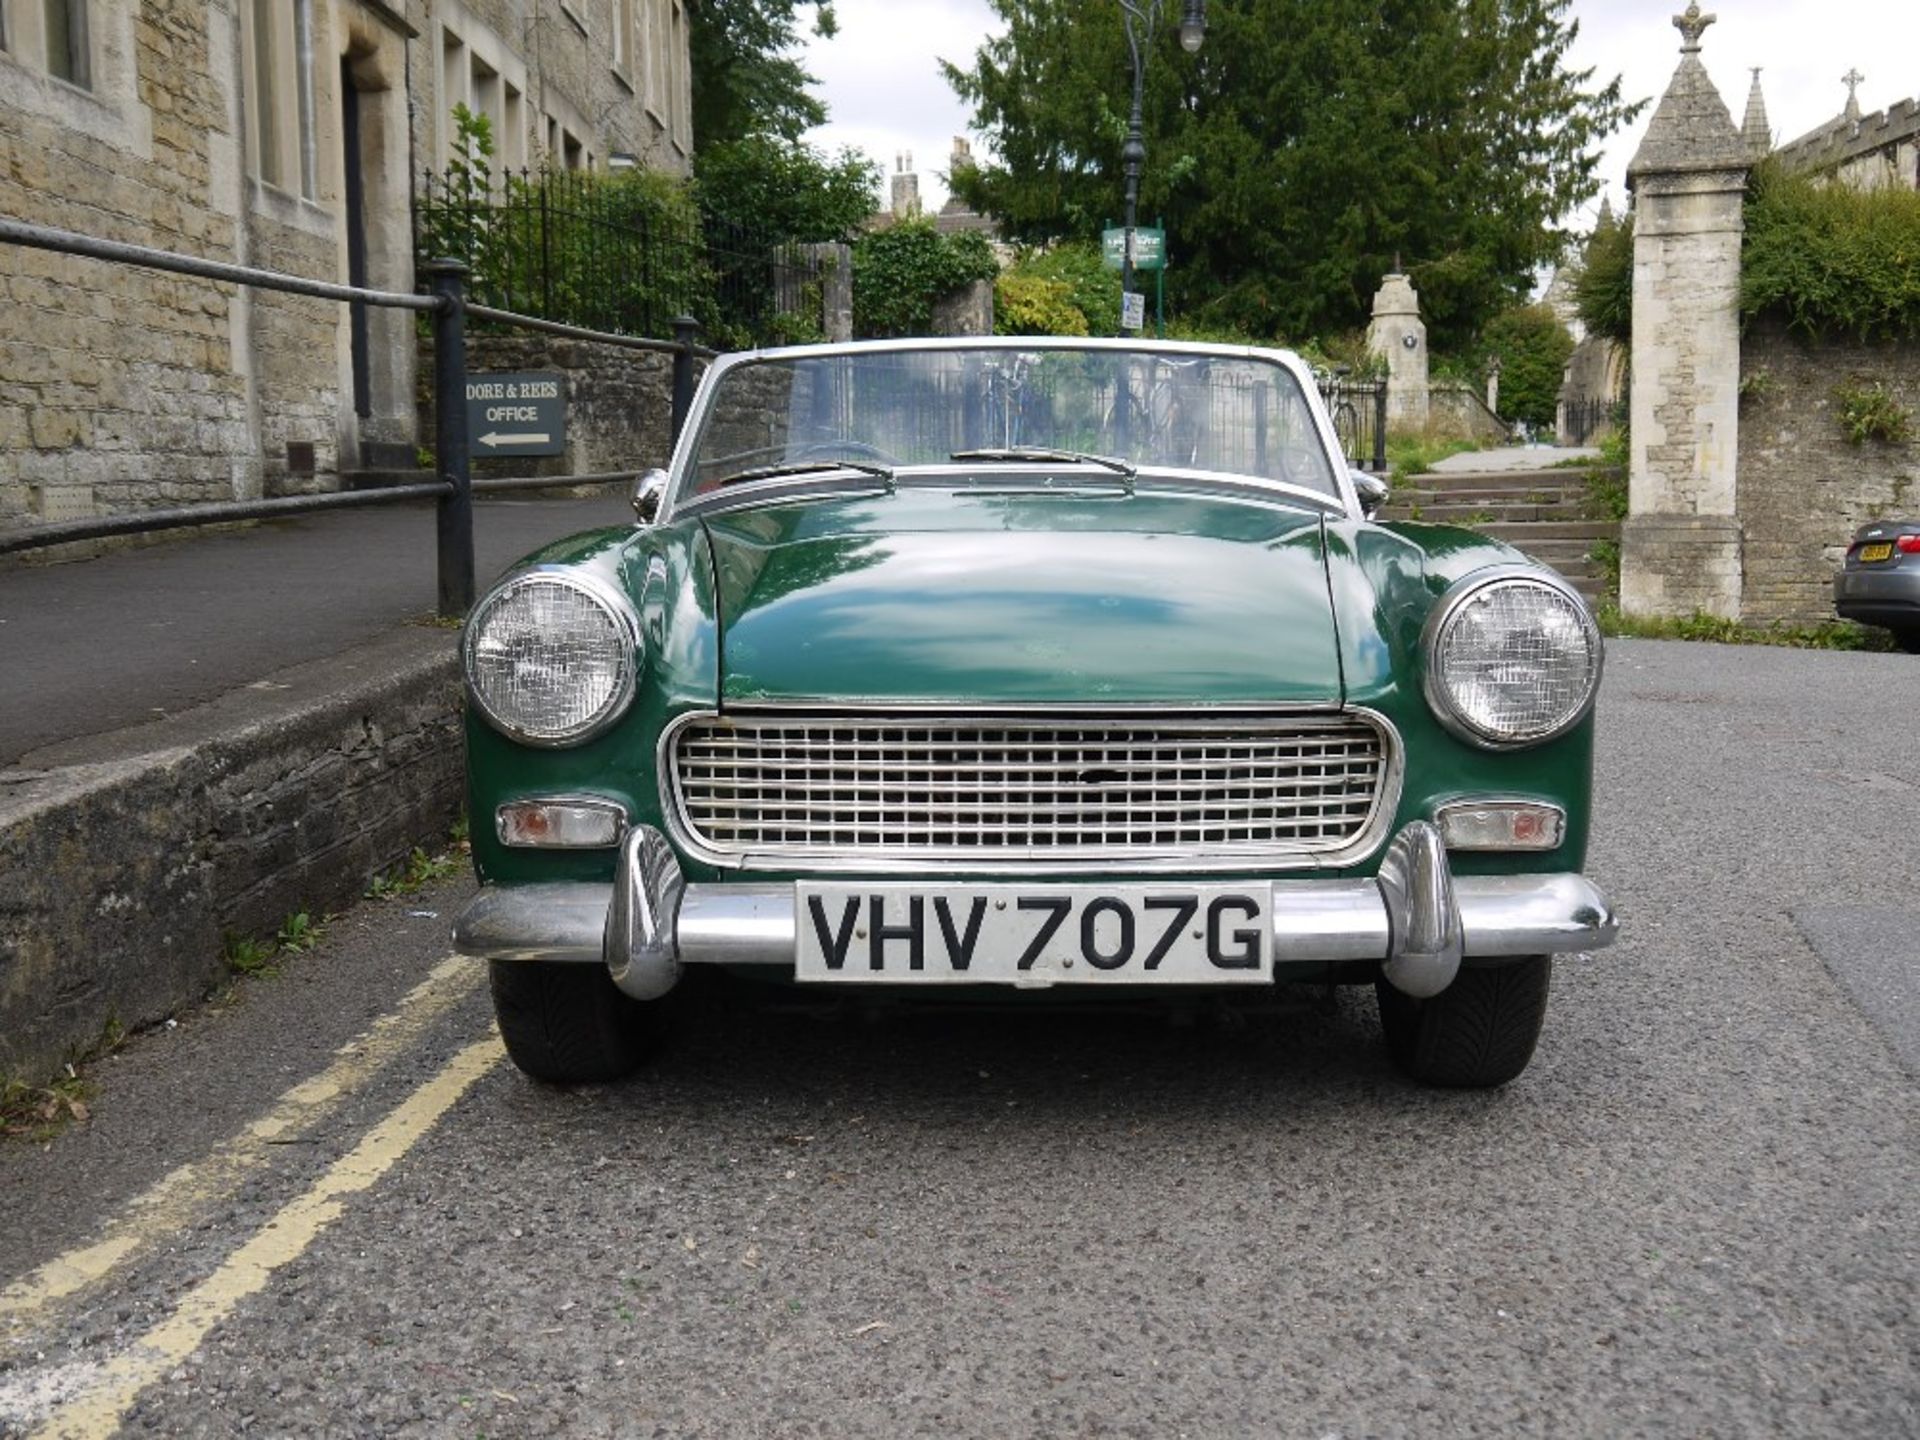 1968 MG MIDGET MARK III Registration Number: VHV 707G Chassis Number: G-AN4/67396-G Recorded - Image 8 of 21